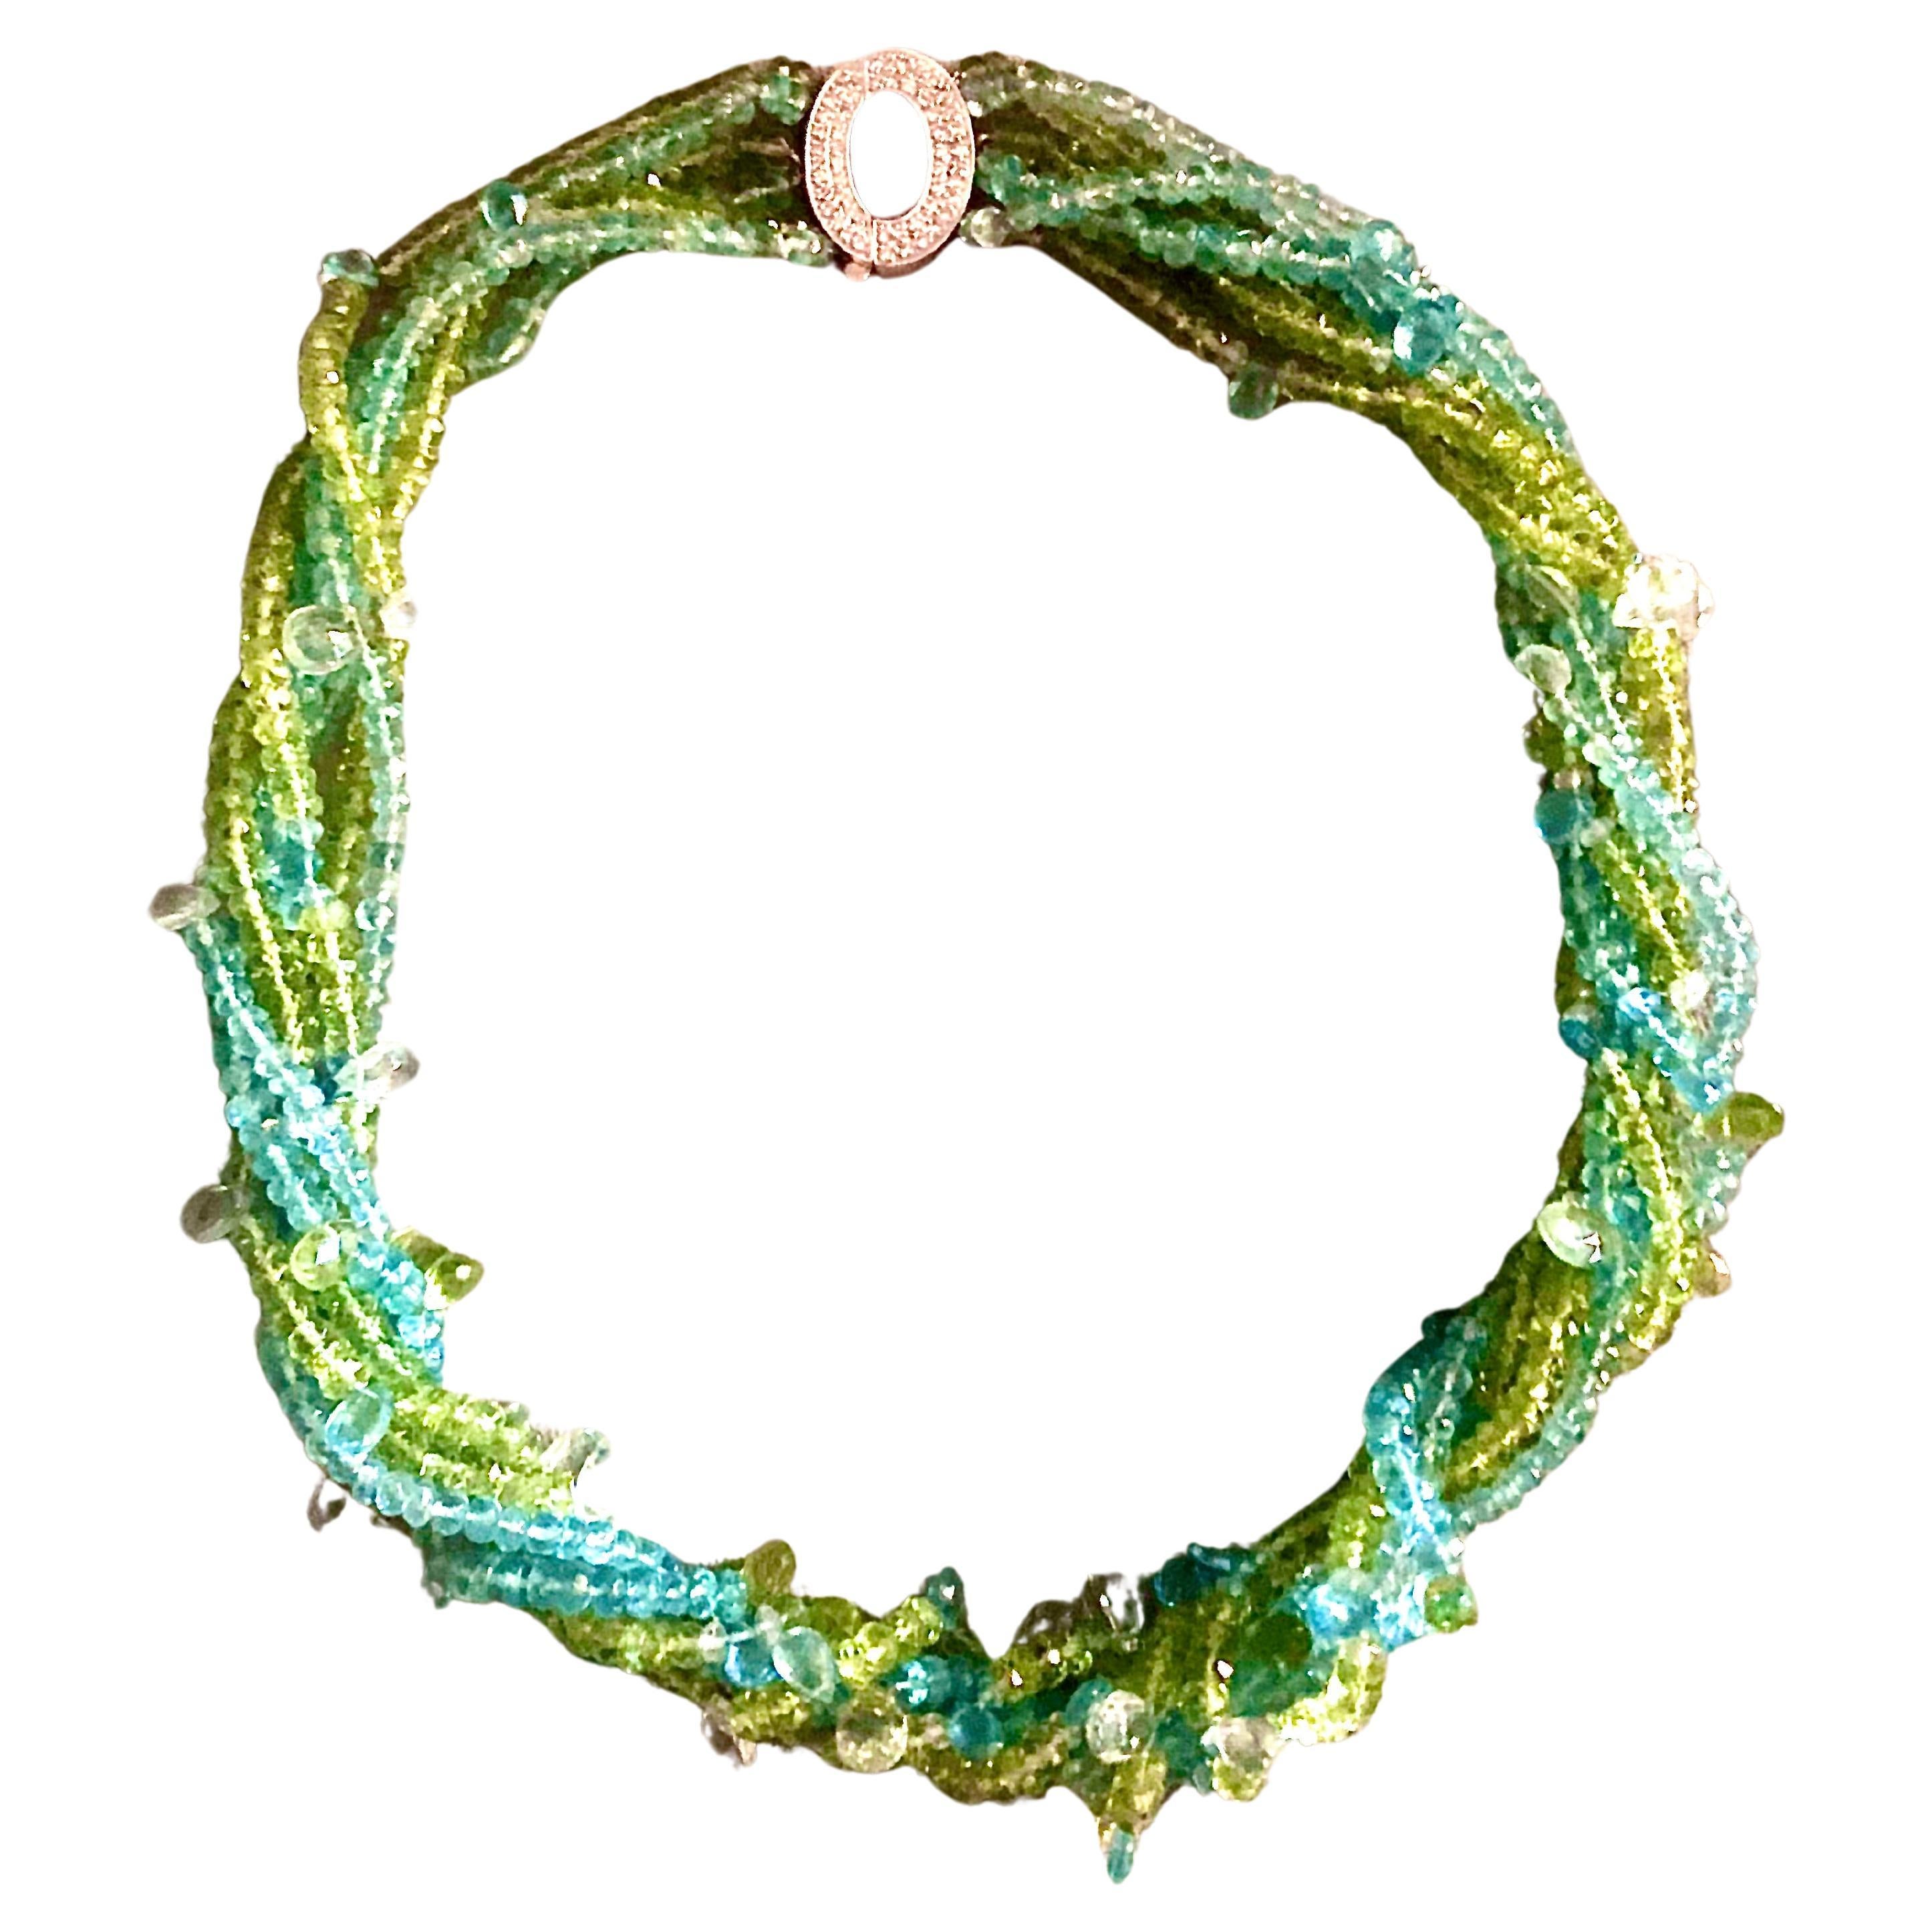 Natural gems from the Earth inspired this necklace. Strands of green peridot and blue aquamarine reflect earth and sky. Woven throughout are sparkling multi size faceted pear-shaped pale aquamarine briolettes glistening like new fallen raindrops .